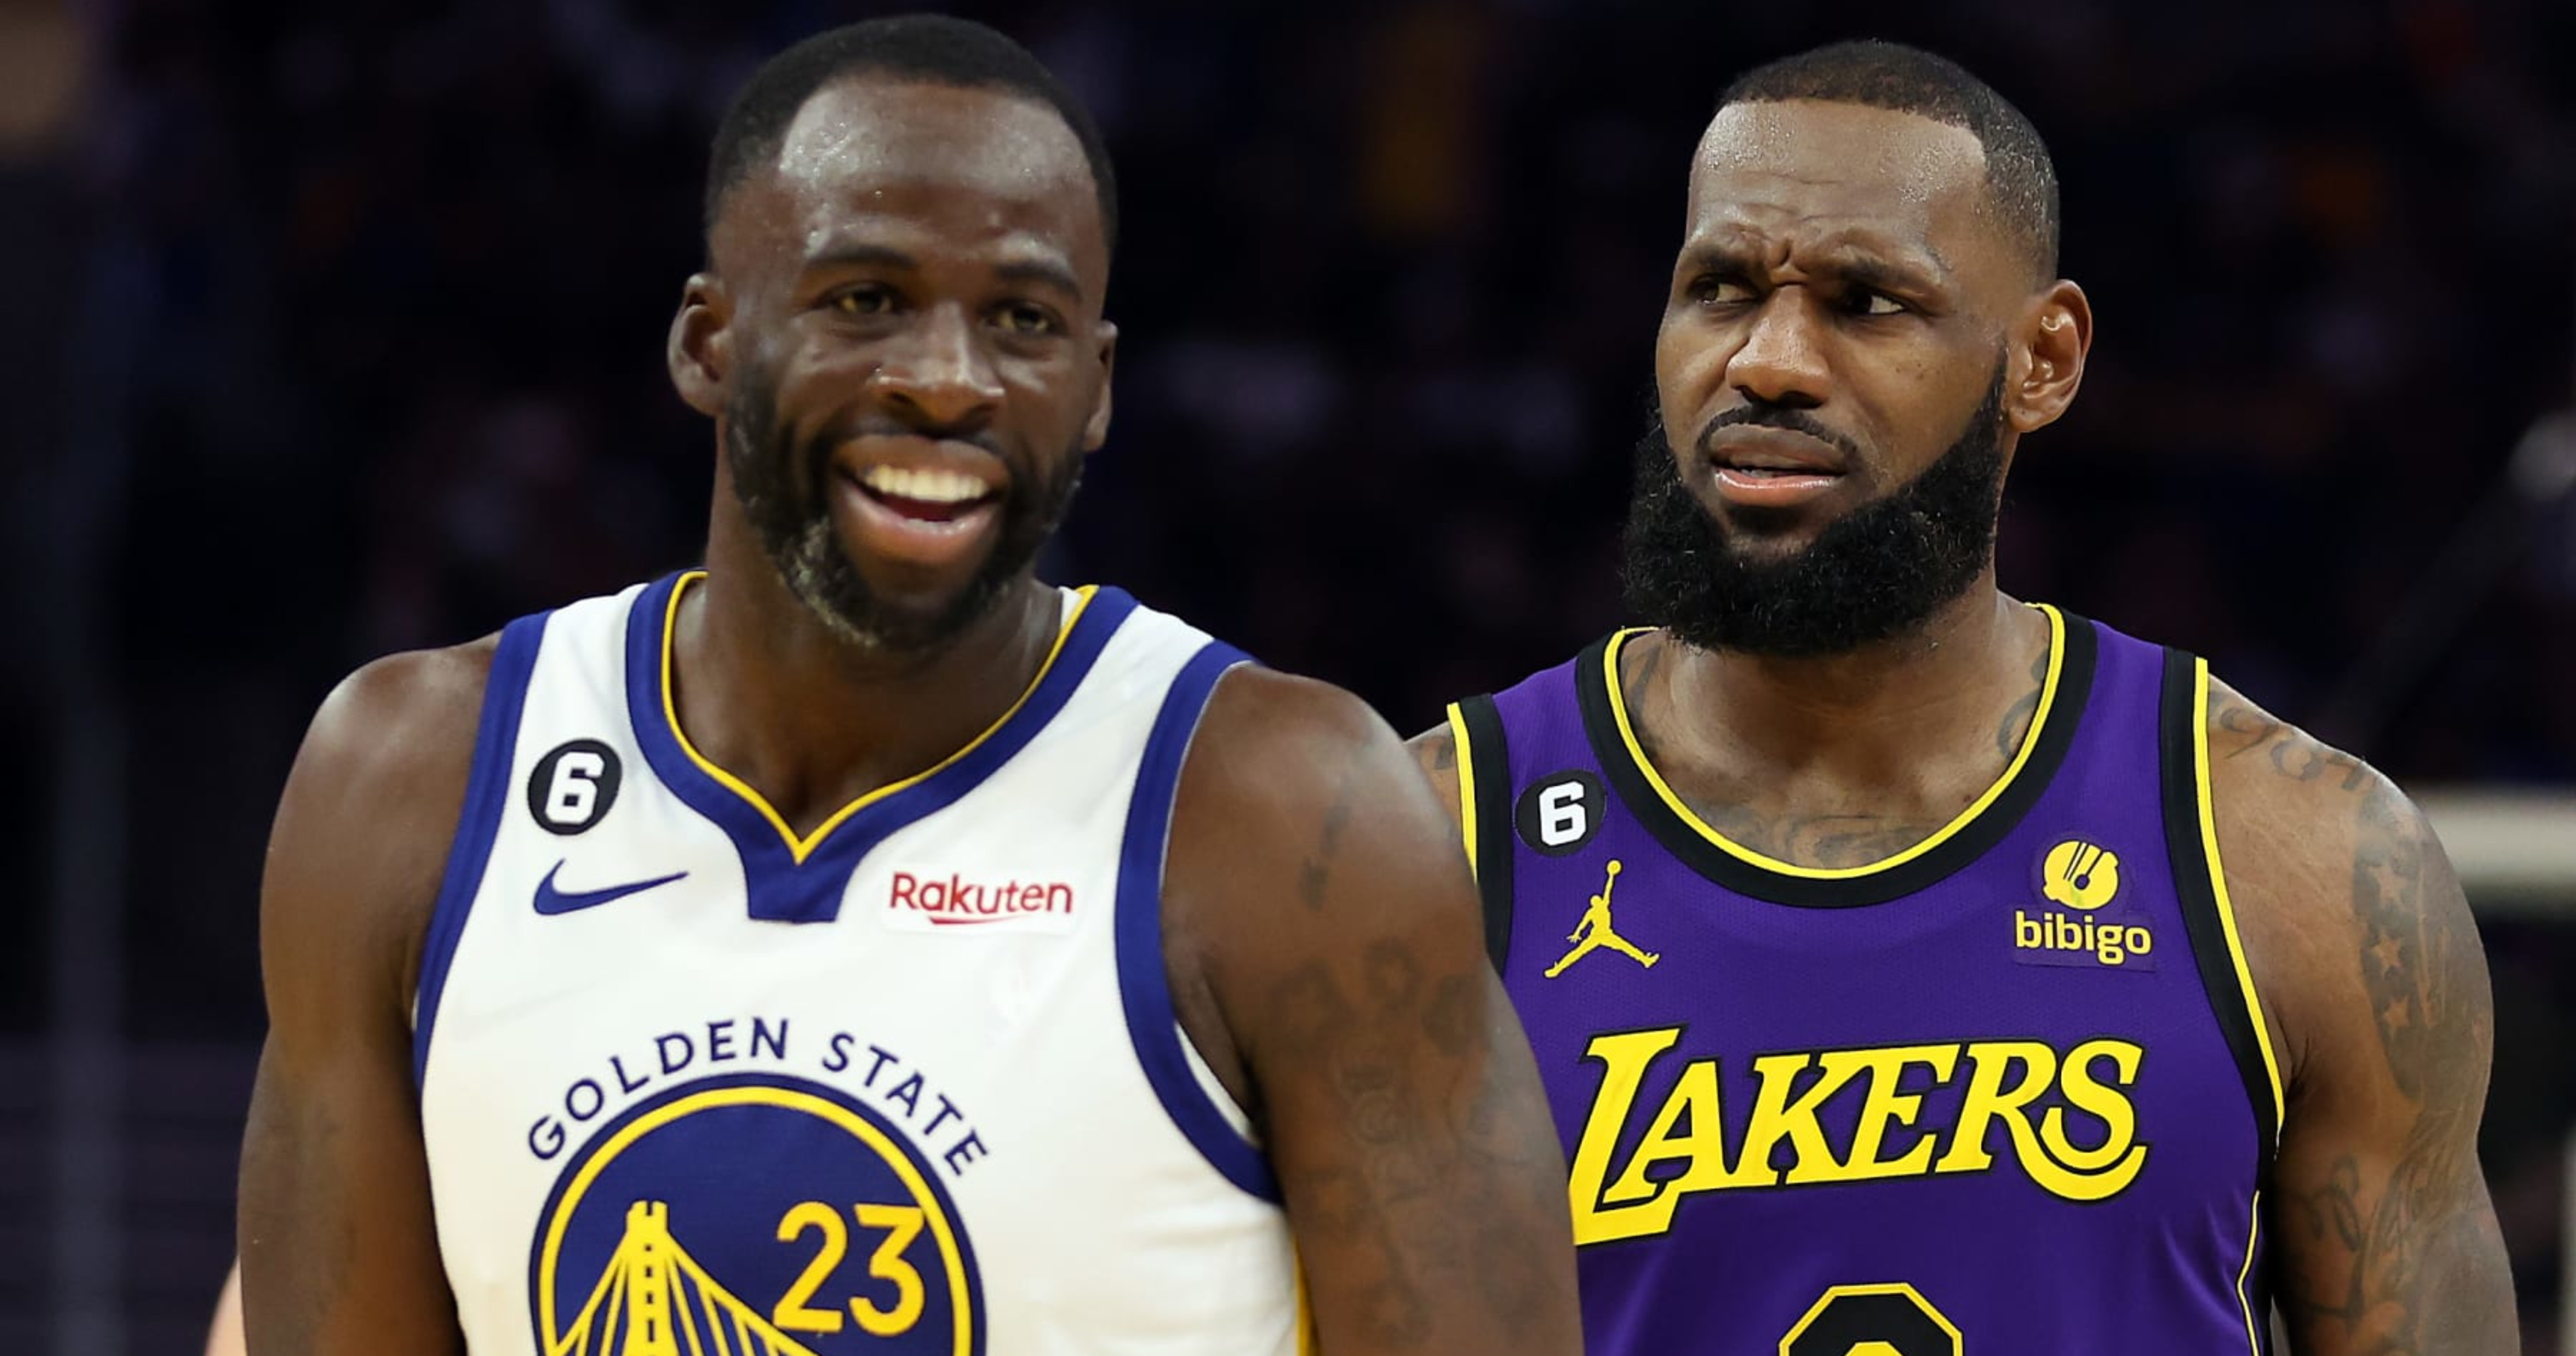 Report: Draymond Green 'Close' to Hiring LeBron James' Agent, Rich Paul, News, Scores, Highlights, Stats, and Rumors